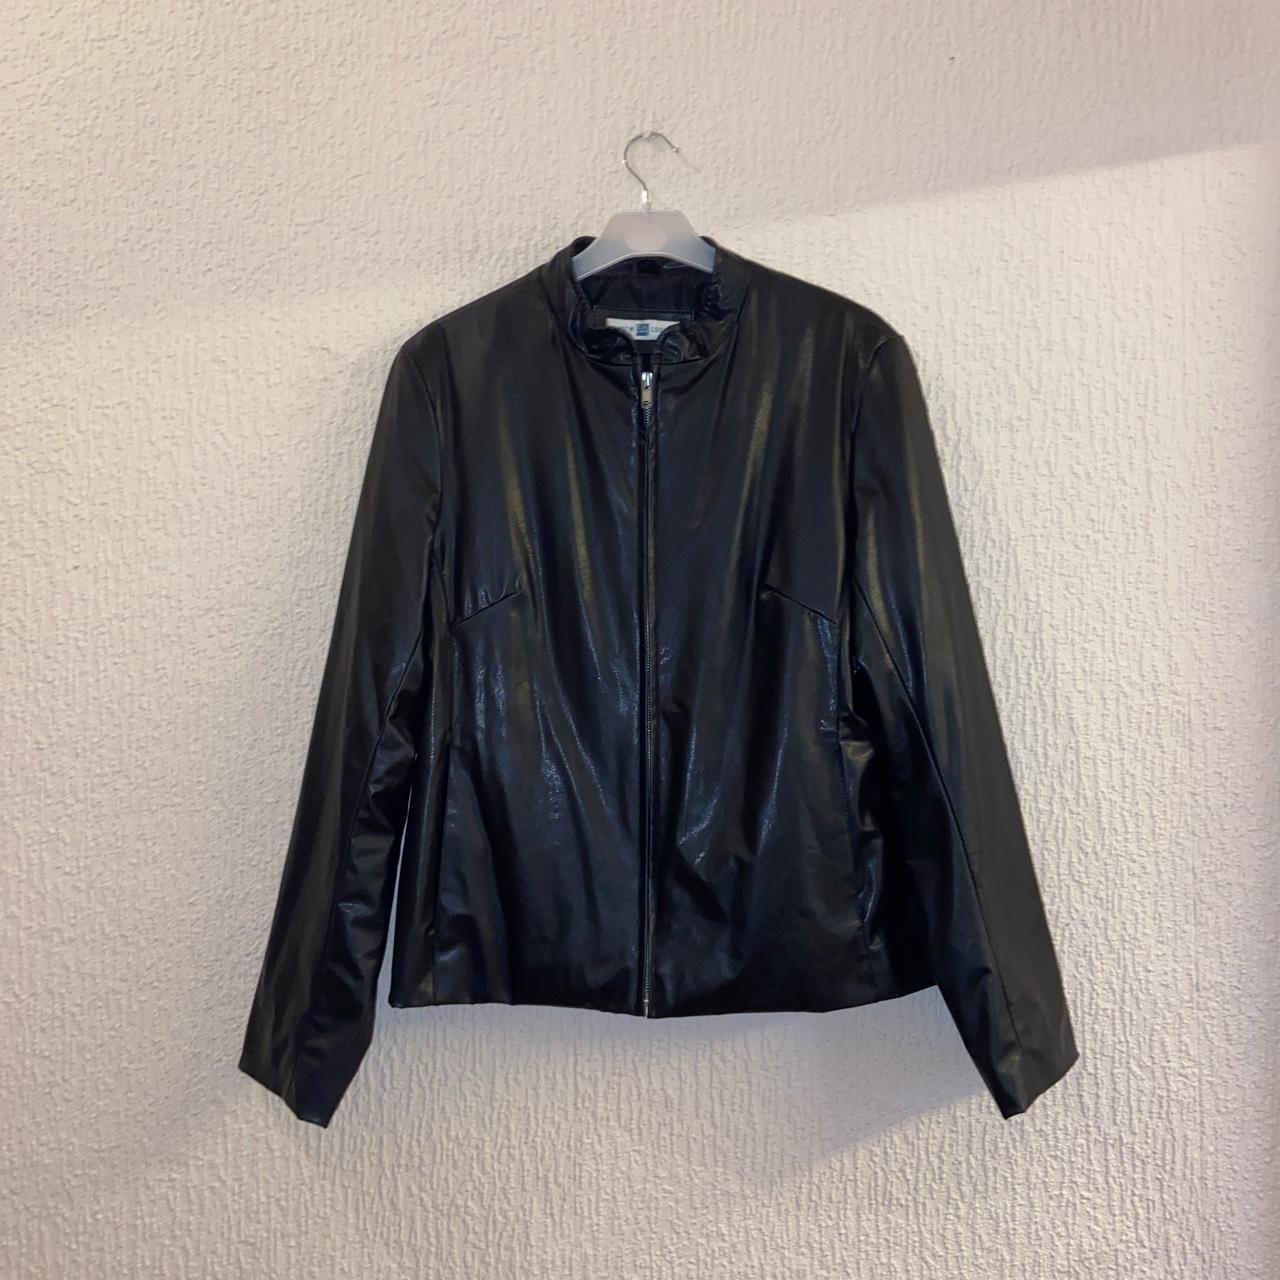 Vintage 90s leather jacket from new look. Perfect... - Depop